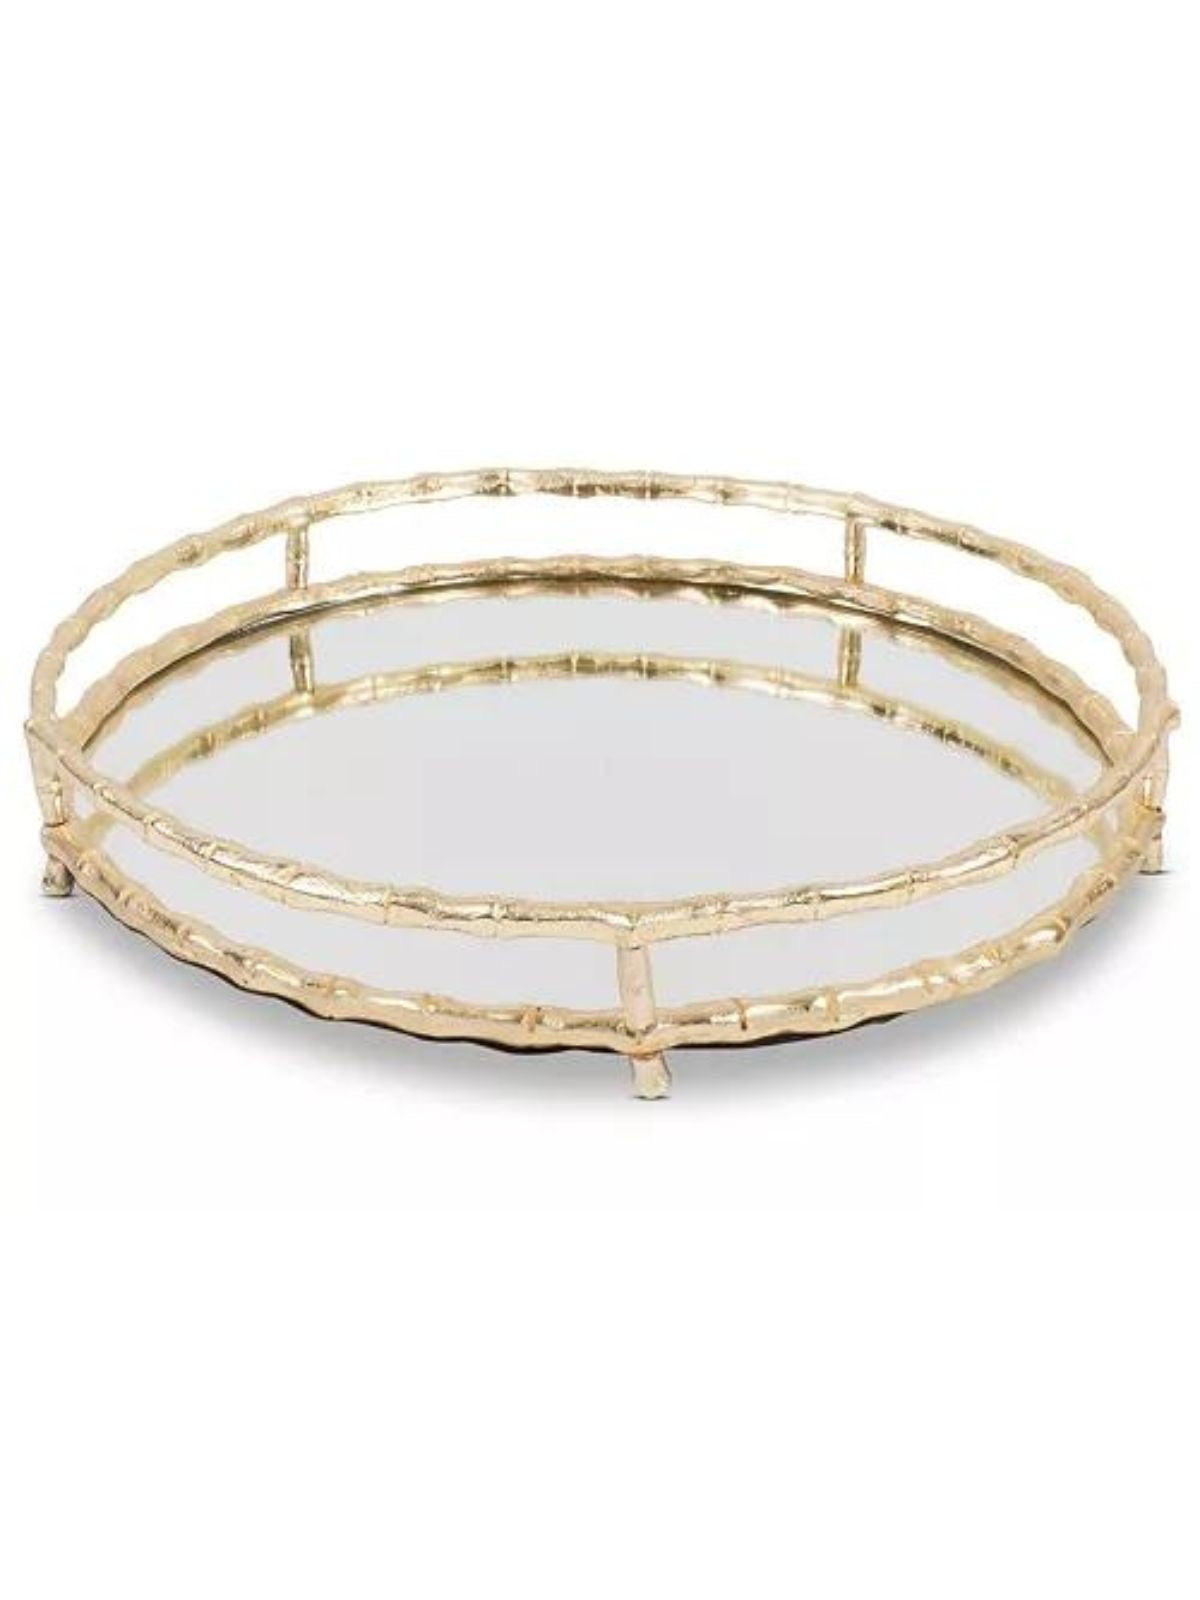 Gold Metal Bamboo Designed Round Mirror Tray, Measures 17.D.